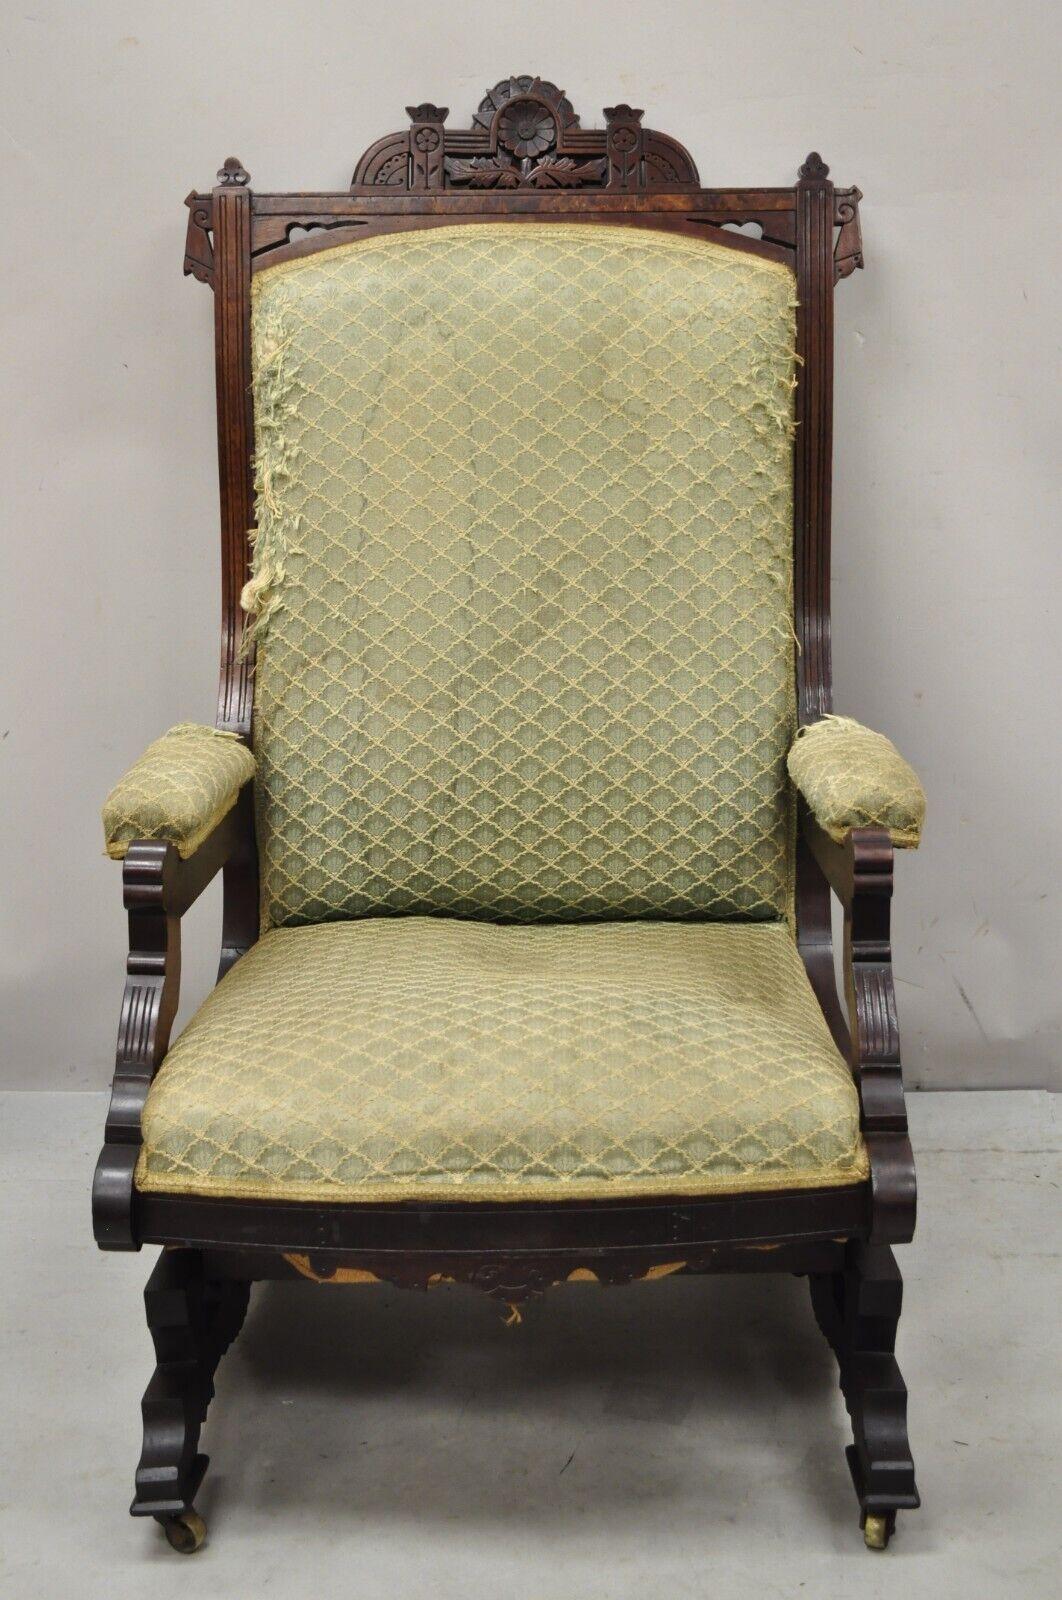 Antique Eastlake Victorian Carved Walnut Platform Rocker Rocking Chair. Item features Rolling casters, solid wood frame, beautiful wood grain, nicely carved details, very nice antique item. Circa 19th Century. Measurements: 41.5